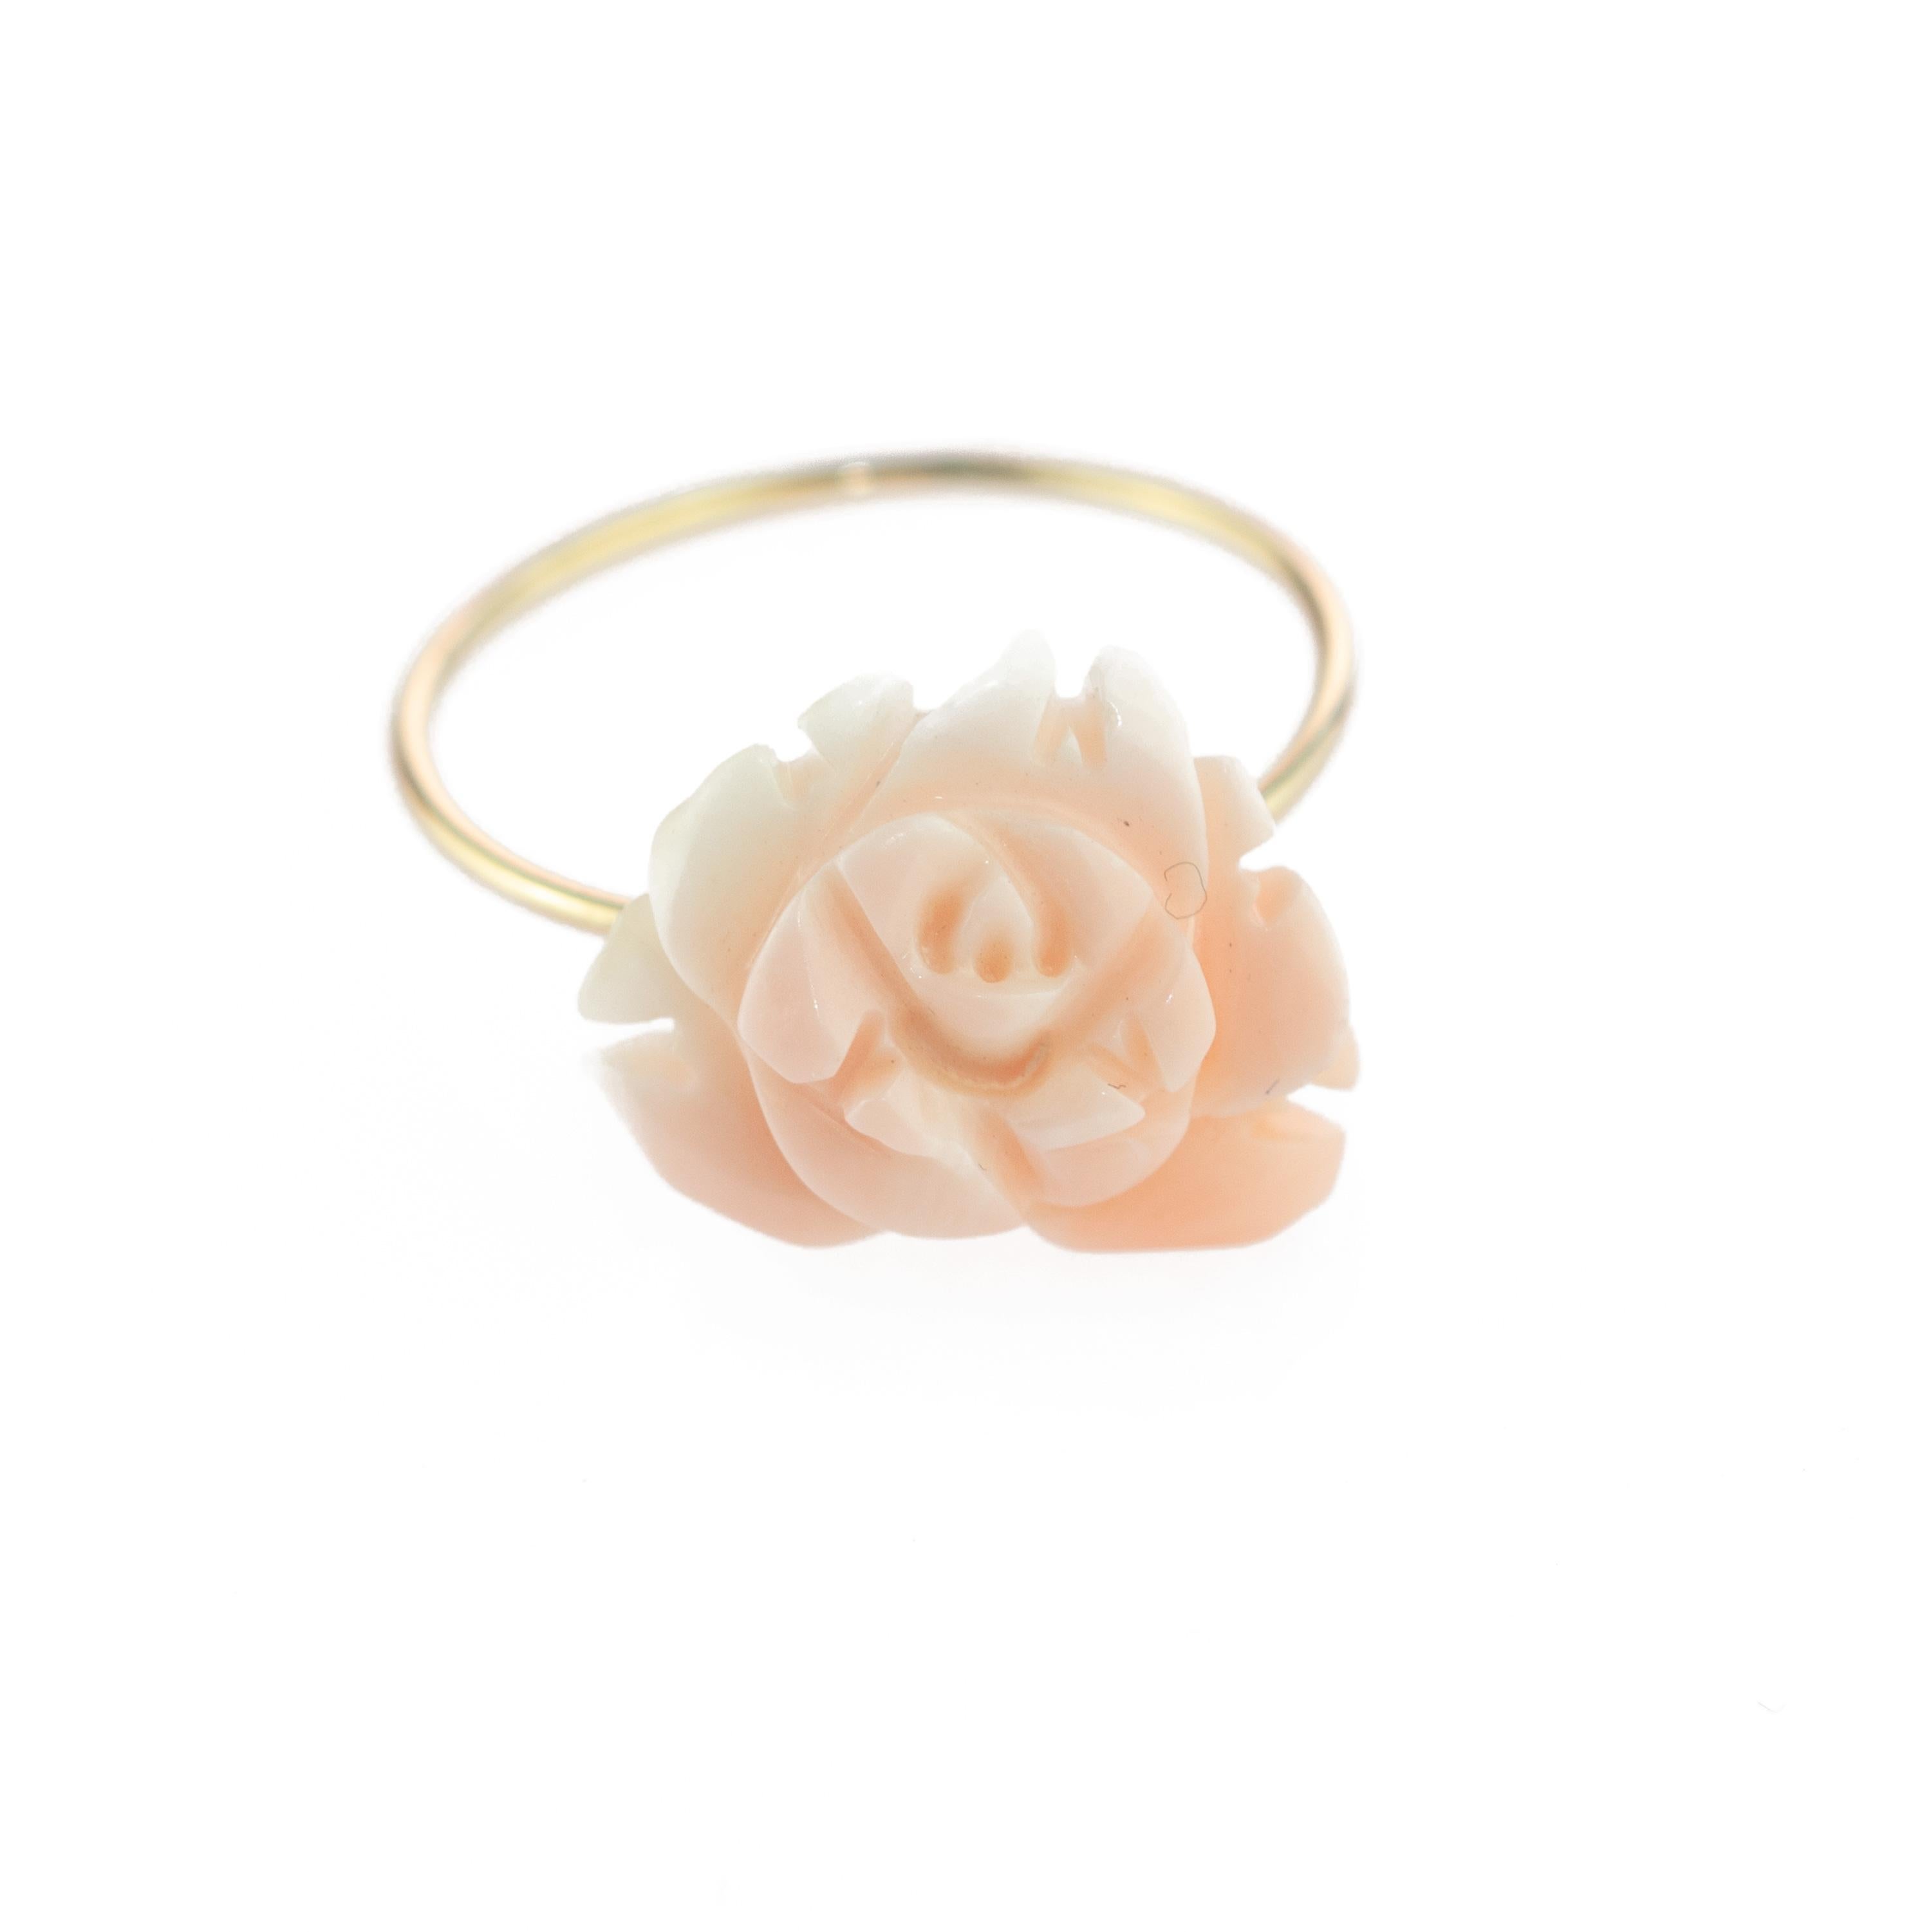 Astonishing and sweet 9 karat yellow gold and coral pink rose ring. Natural coral carved petals that evoke the italian handmade traditional crafted jewelry work. Unique rose carvings in top quality coral for a signature INTINI Jewels look. Elegant